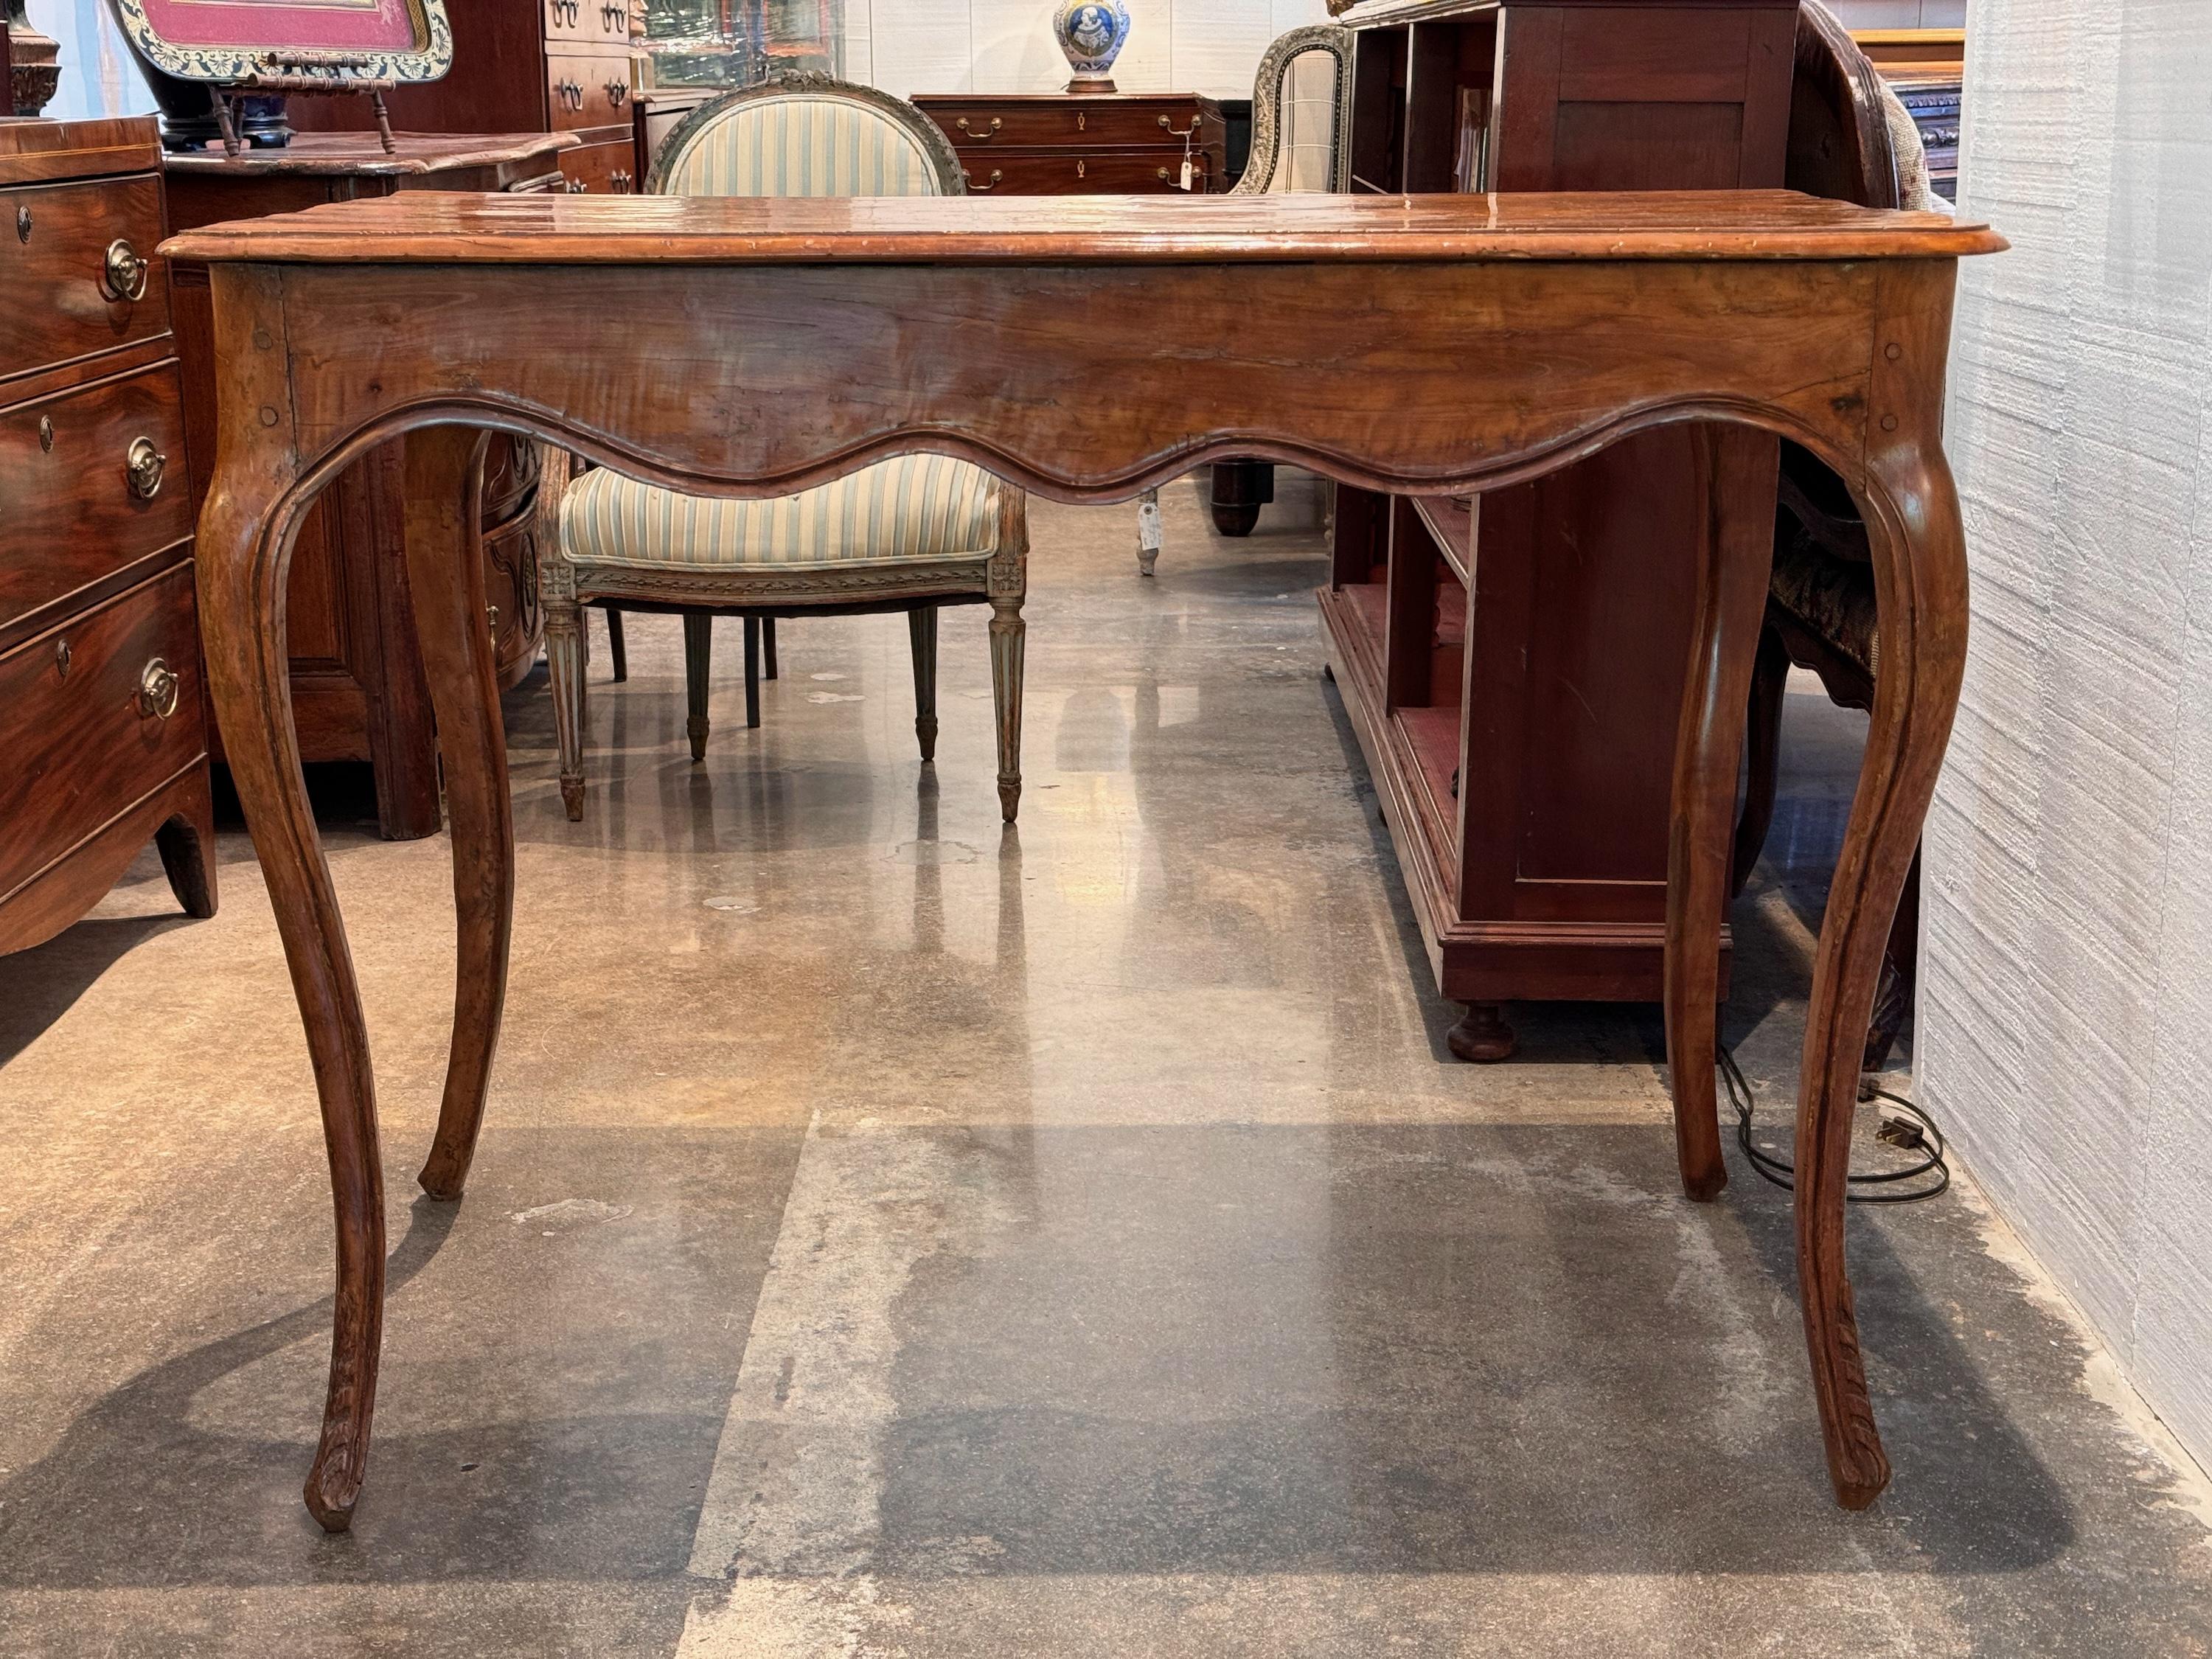 Lovely table, great patina and proportions.